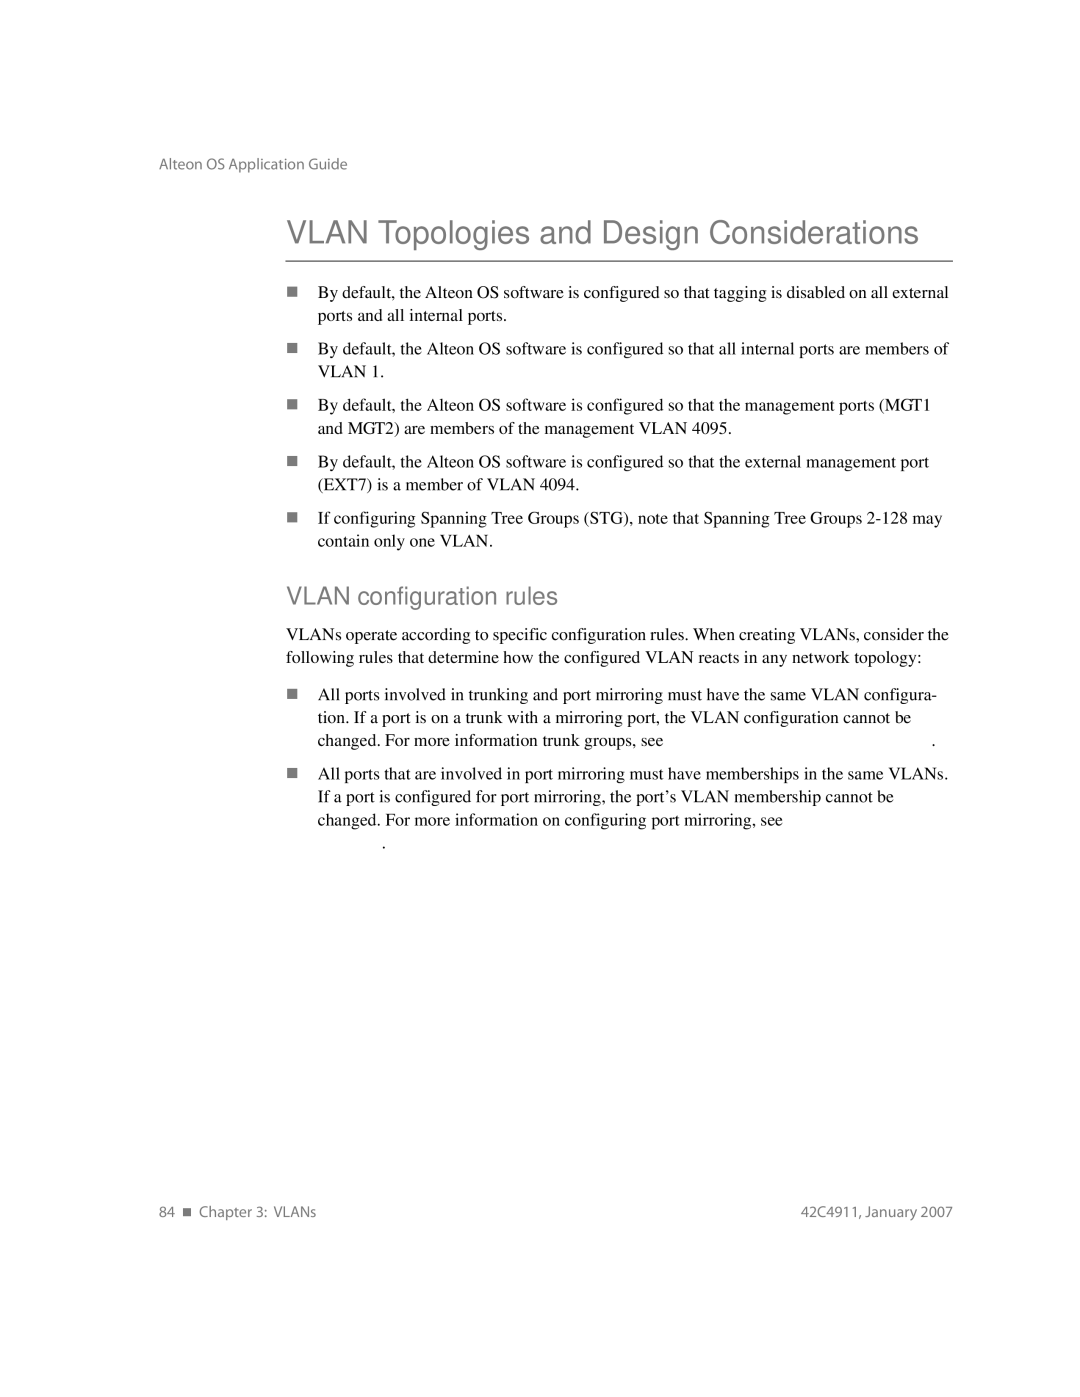 Nortel Networks 42C4911 manual Vlan Topologies and Design Considerations, Vlan configuration rules 